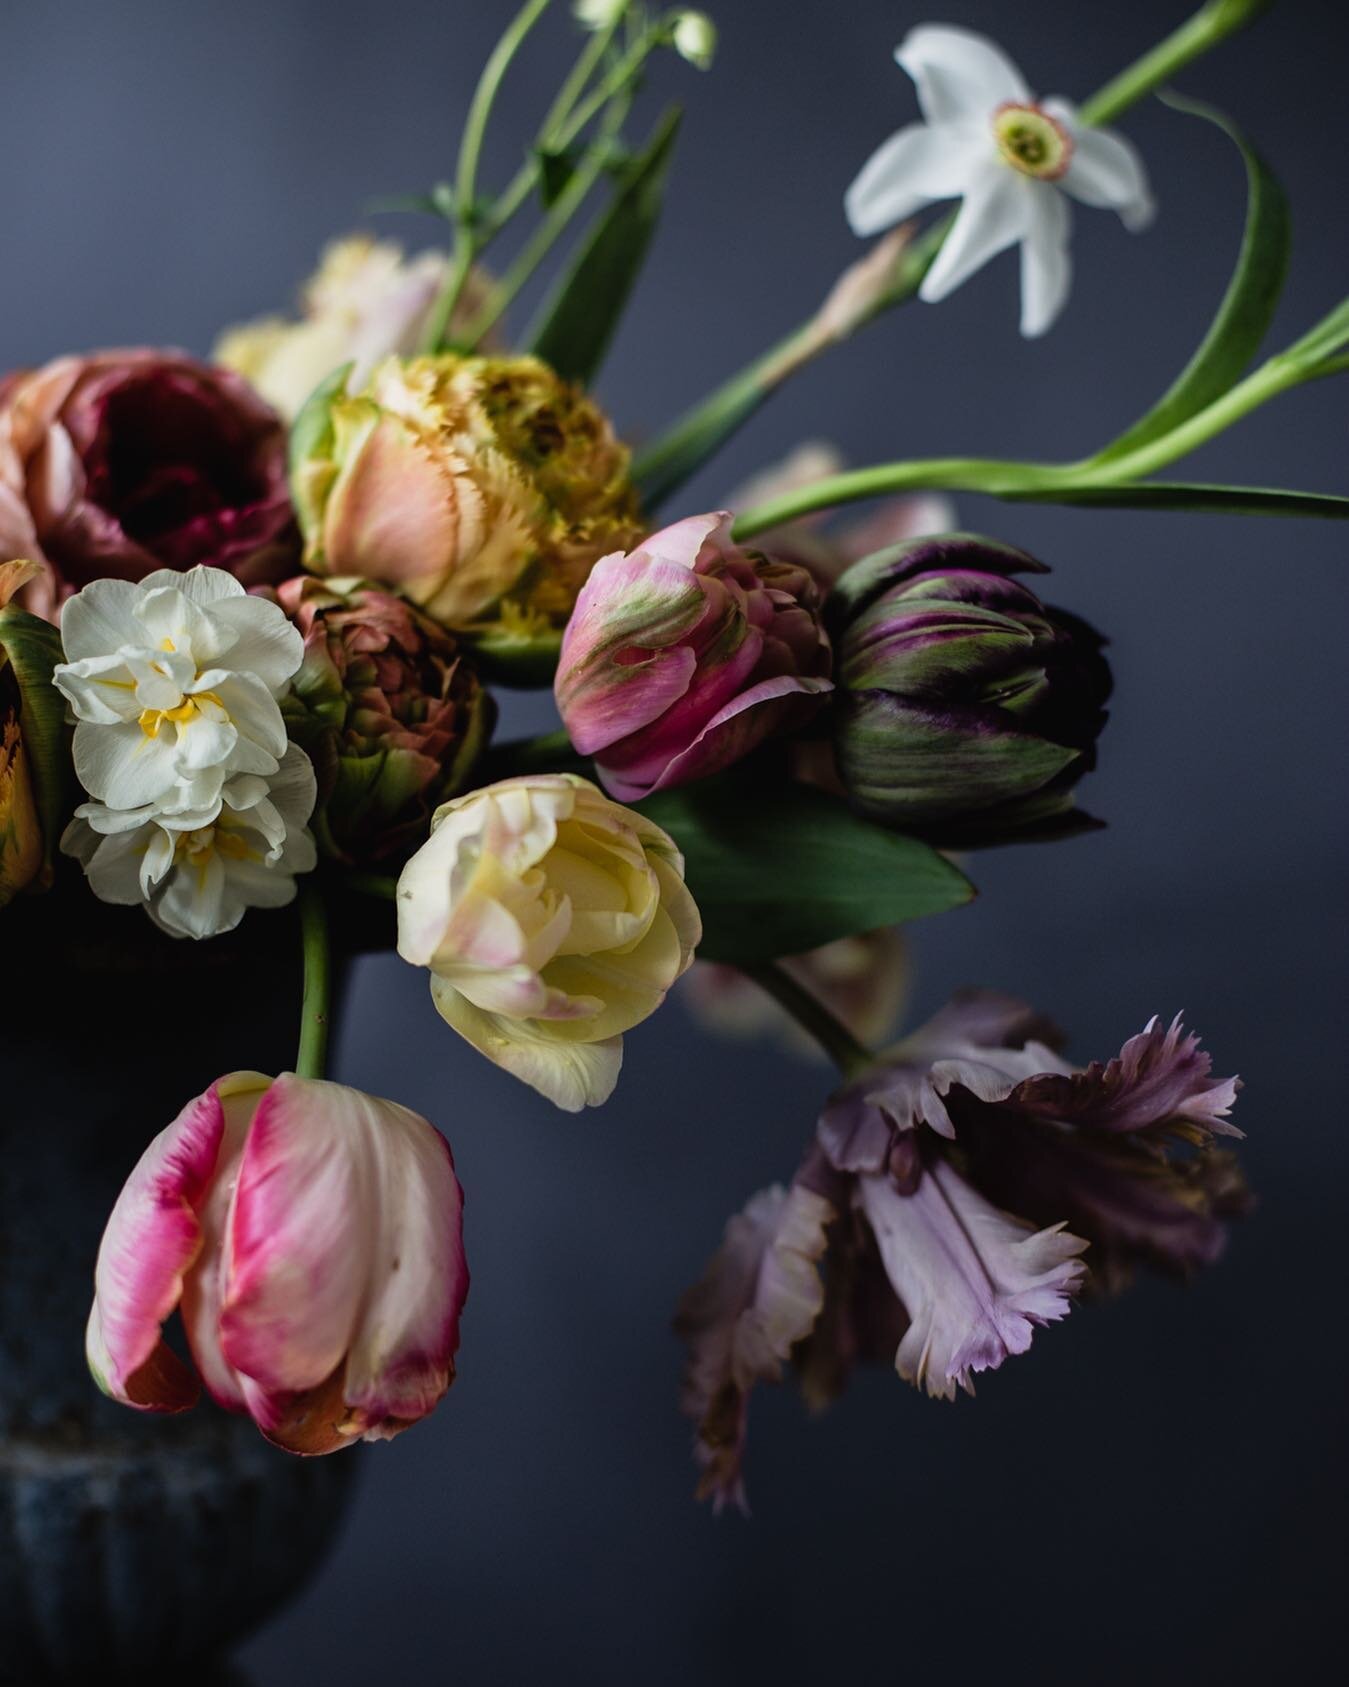 Is there a Vovos tulip appreciation society? Because if not, I think we need to create one. I am more than mildly obsessed with it. 
.
.
.
.
.
#vovostulip #dutchmastersinspired #chiaroscurophotography #chiaroscuro #springflowersmakemehappy #excessive